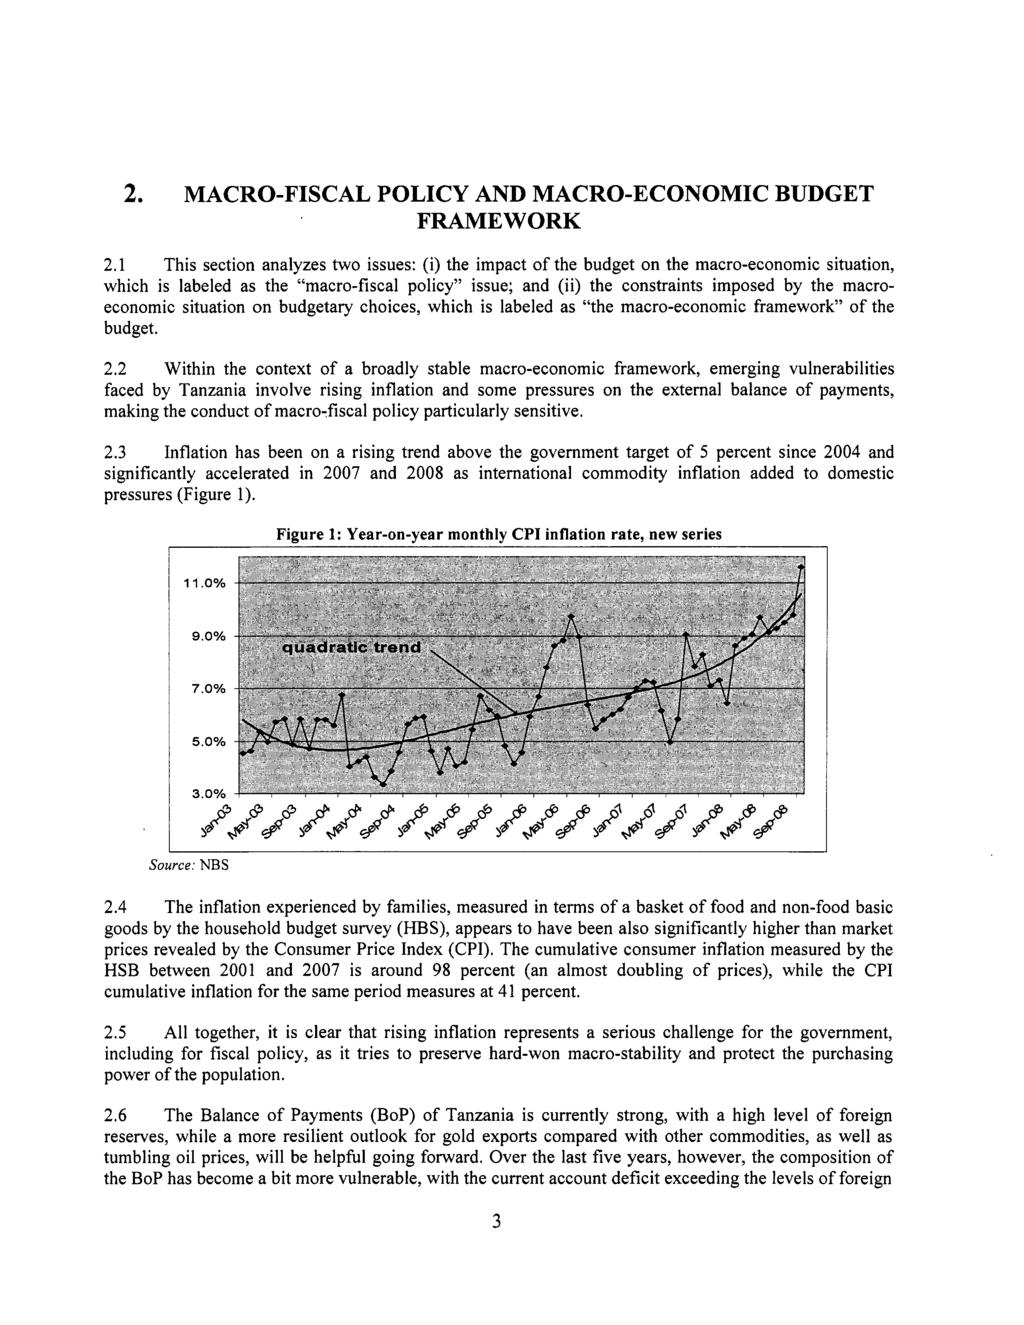 2. MACRO-FISCAL POLICY AND MACRO-ECONOMIC BUDGET FRAME WORK 2.